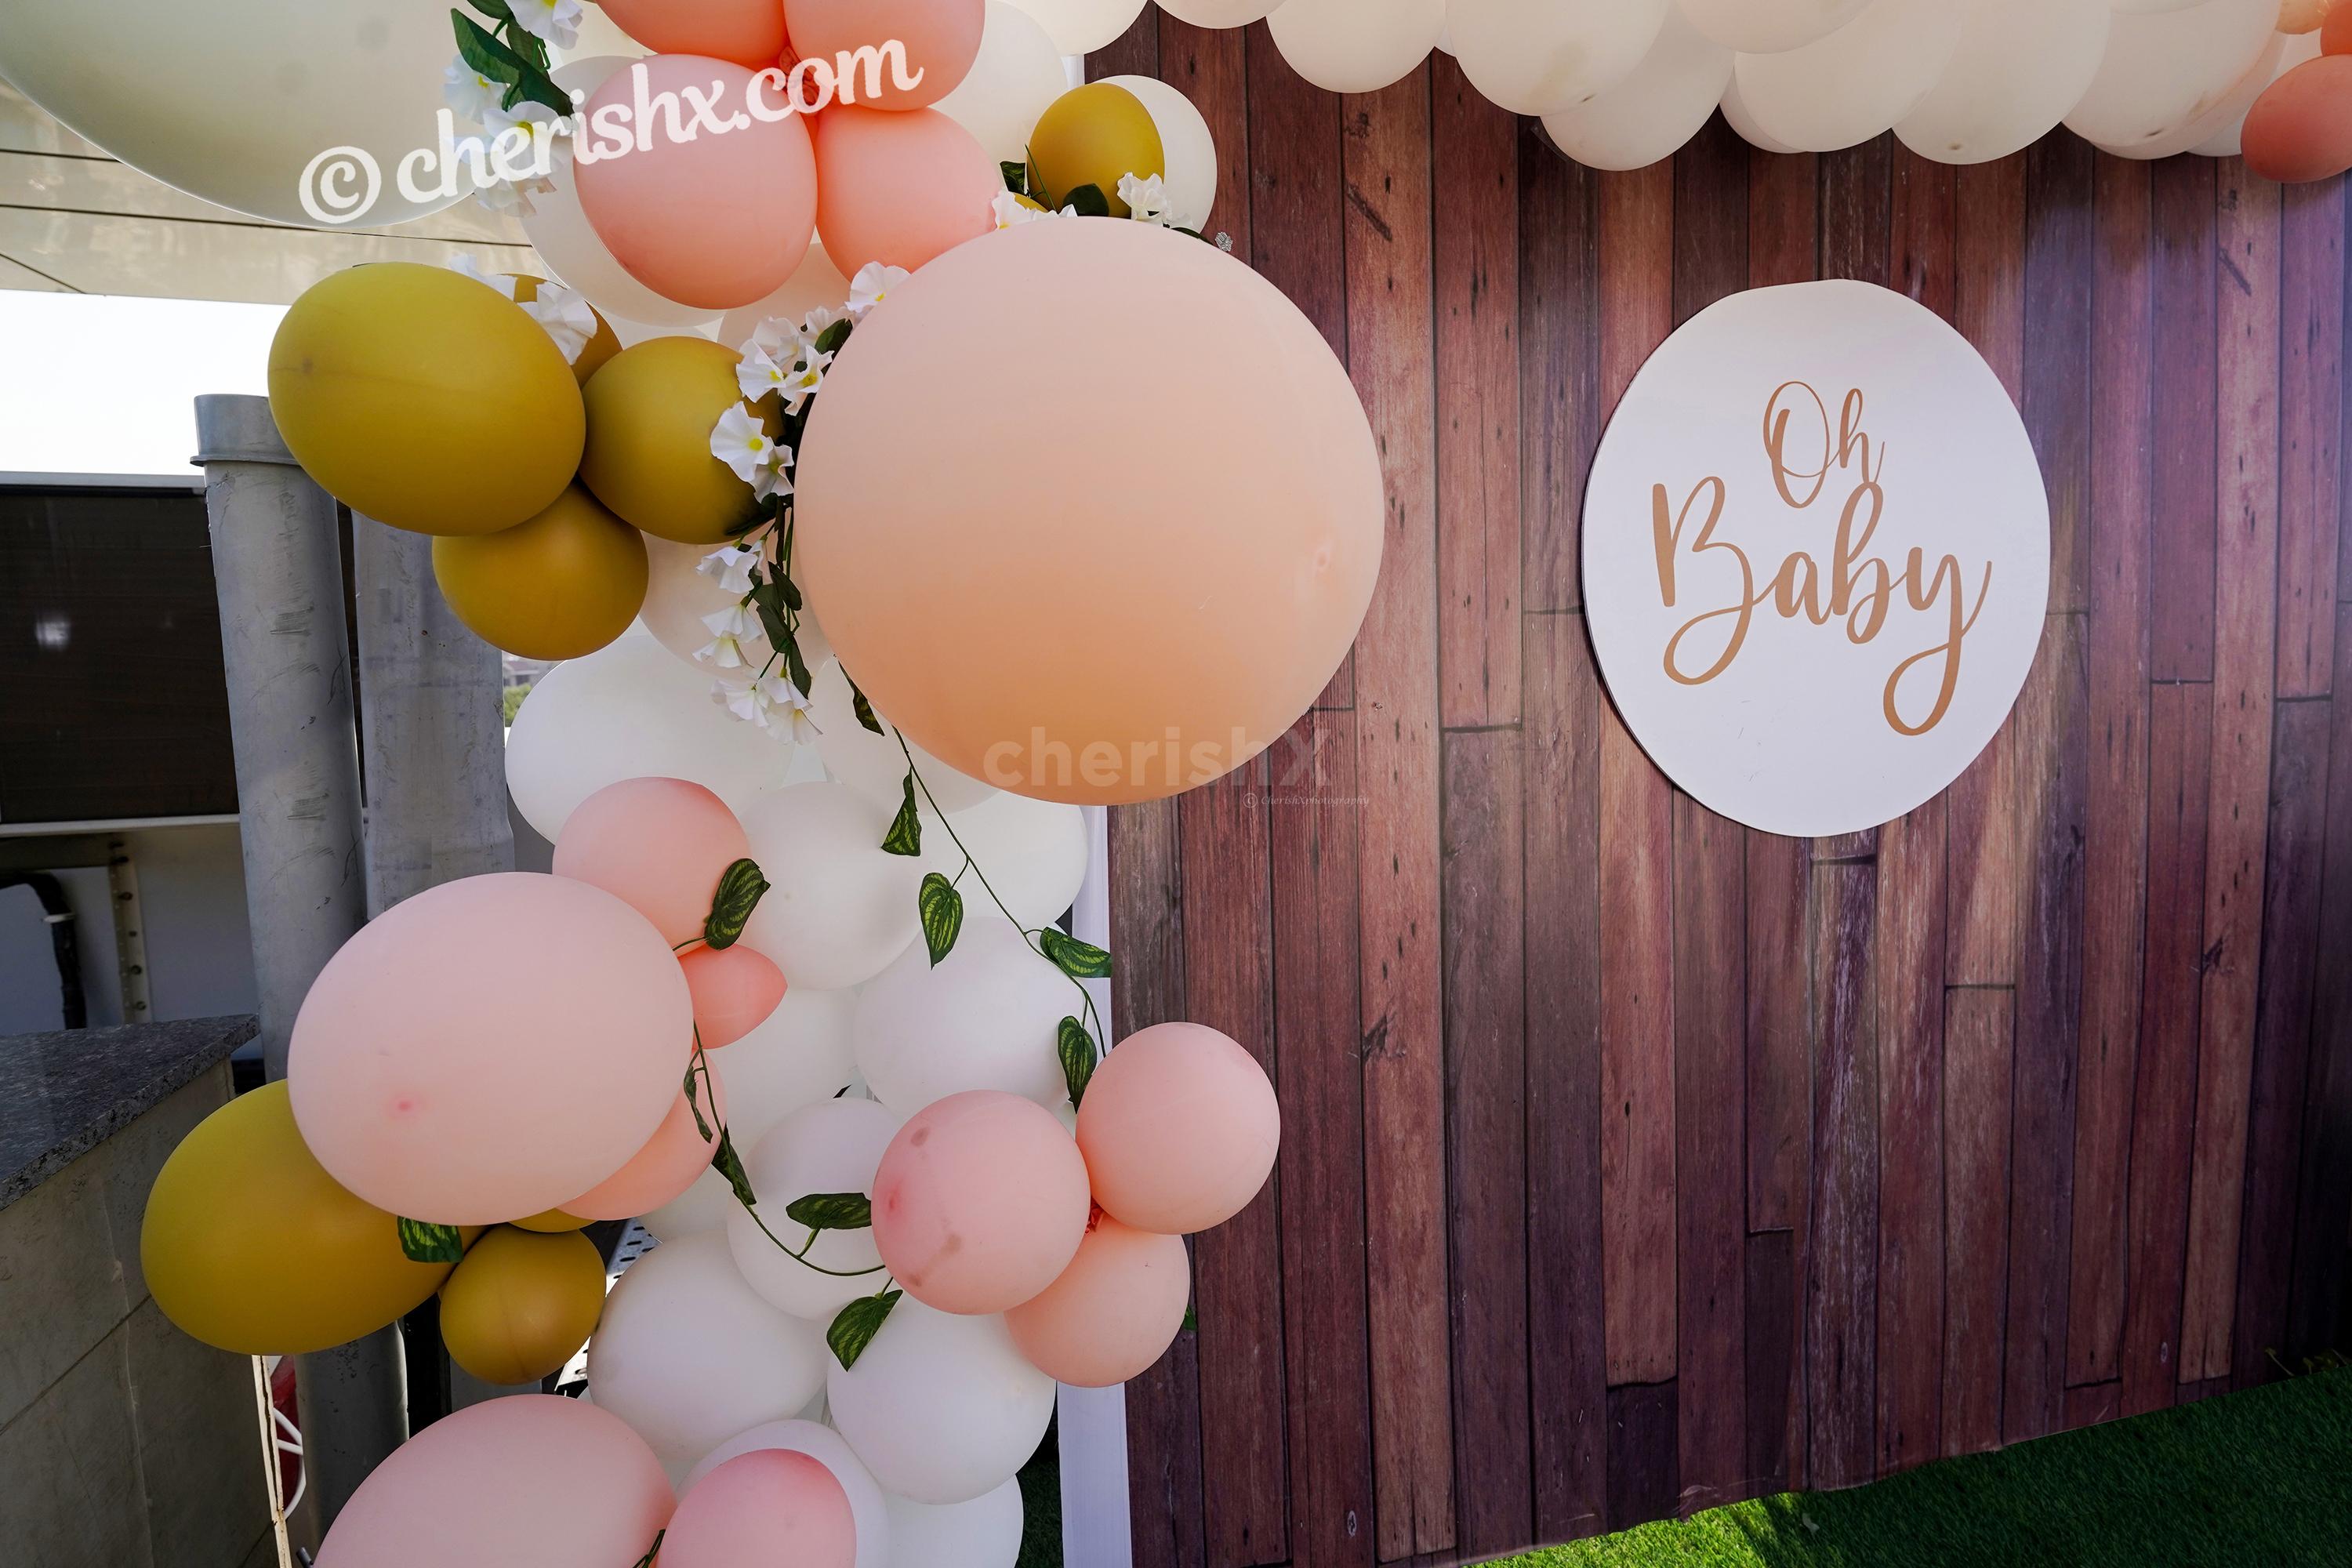 Make the day special for the 'Mother to be' by booking a wonderful Peach Colored Baby Shower Decor by CherishX!